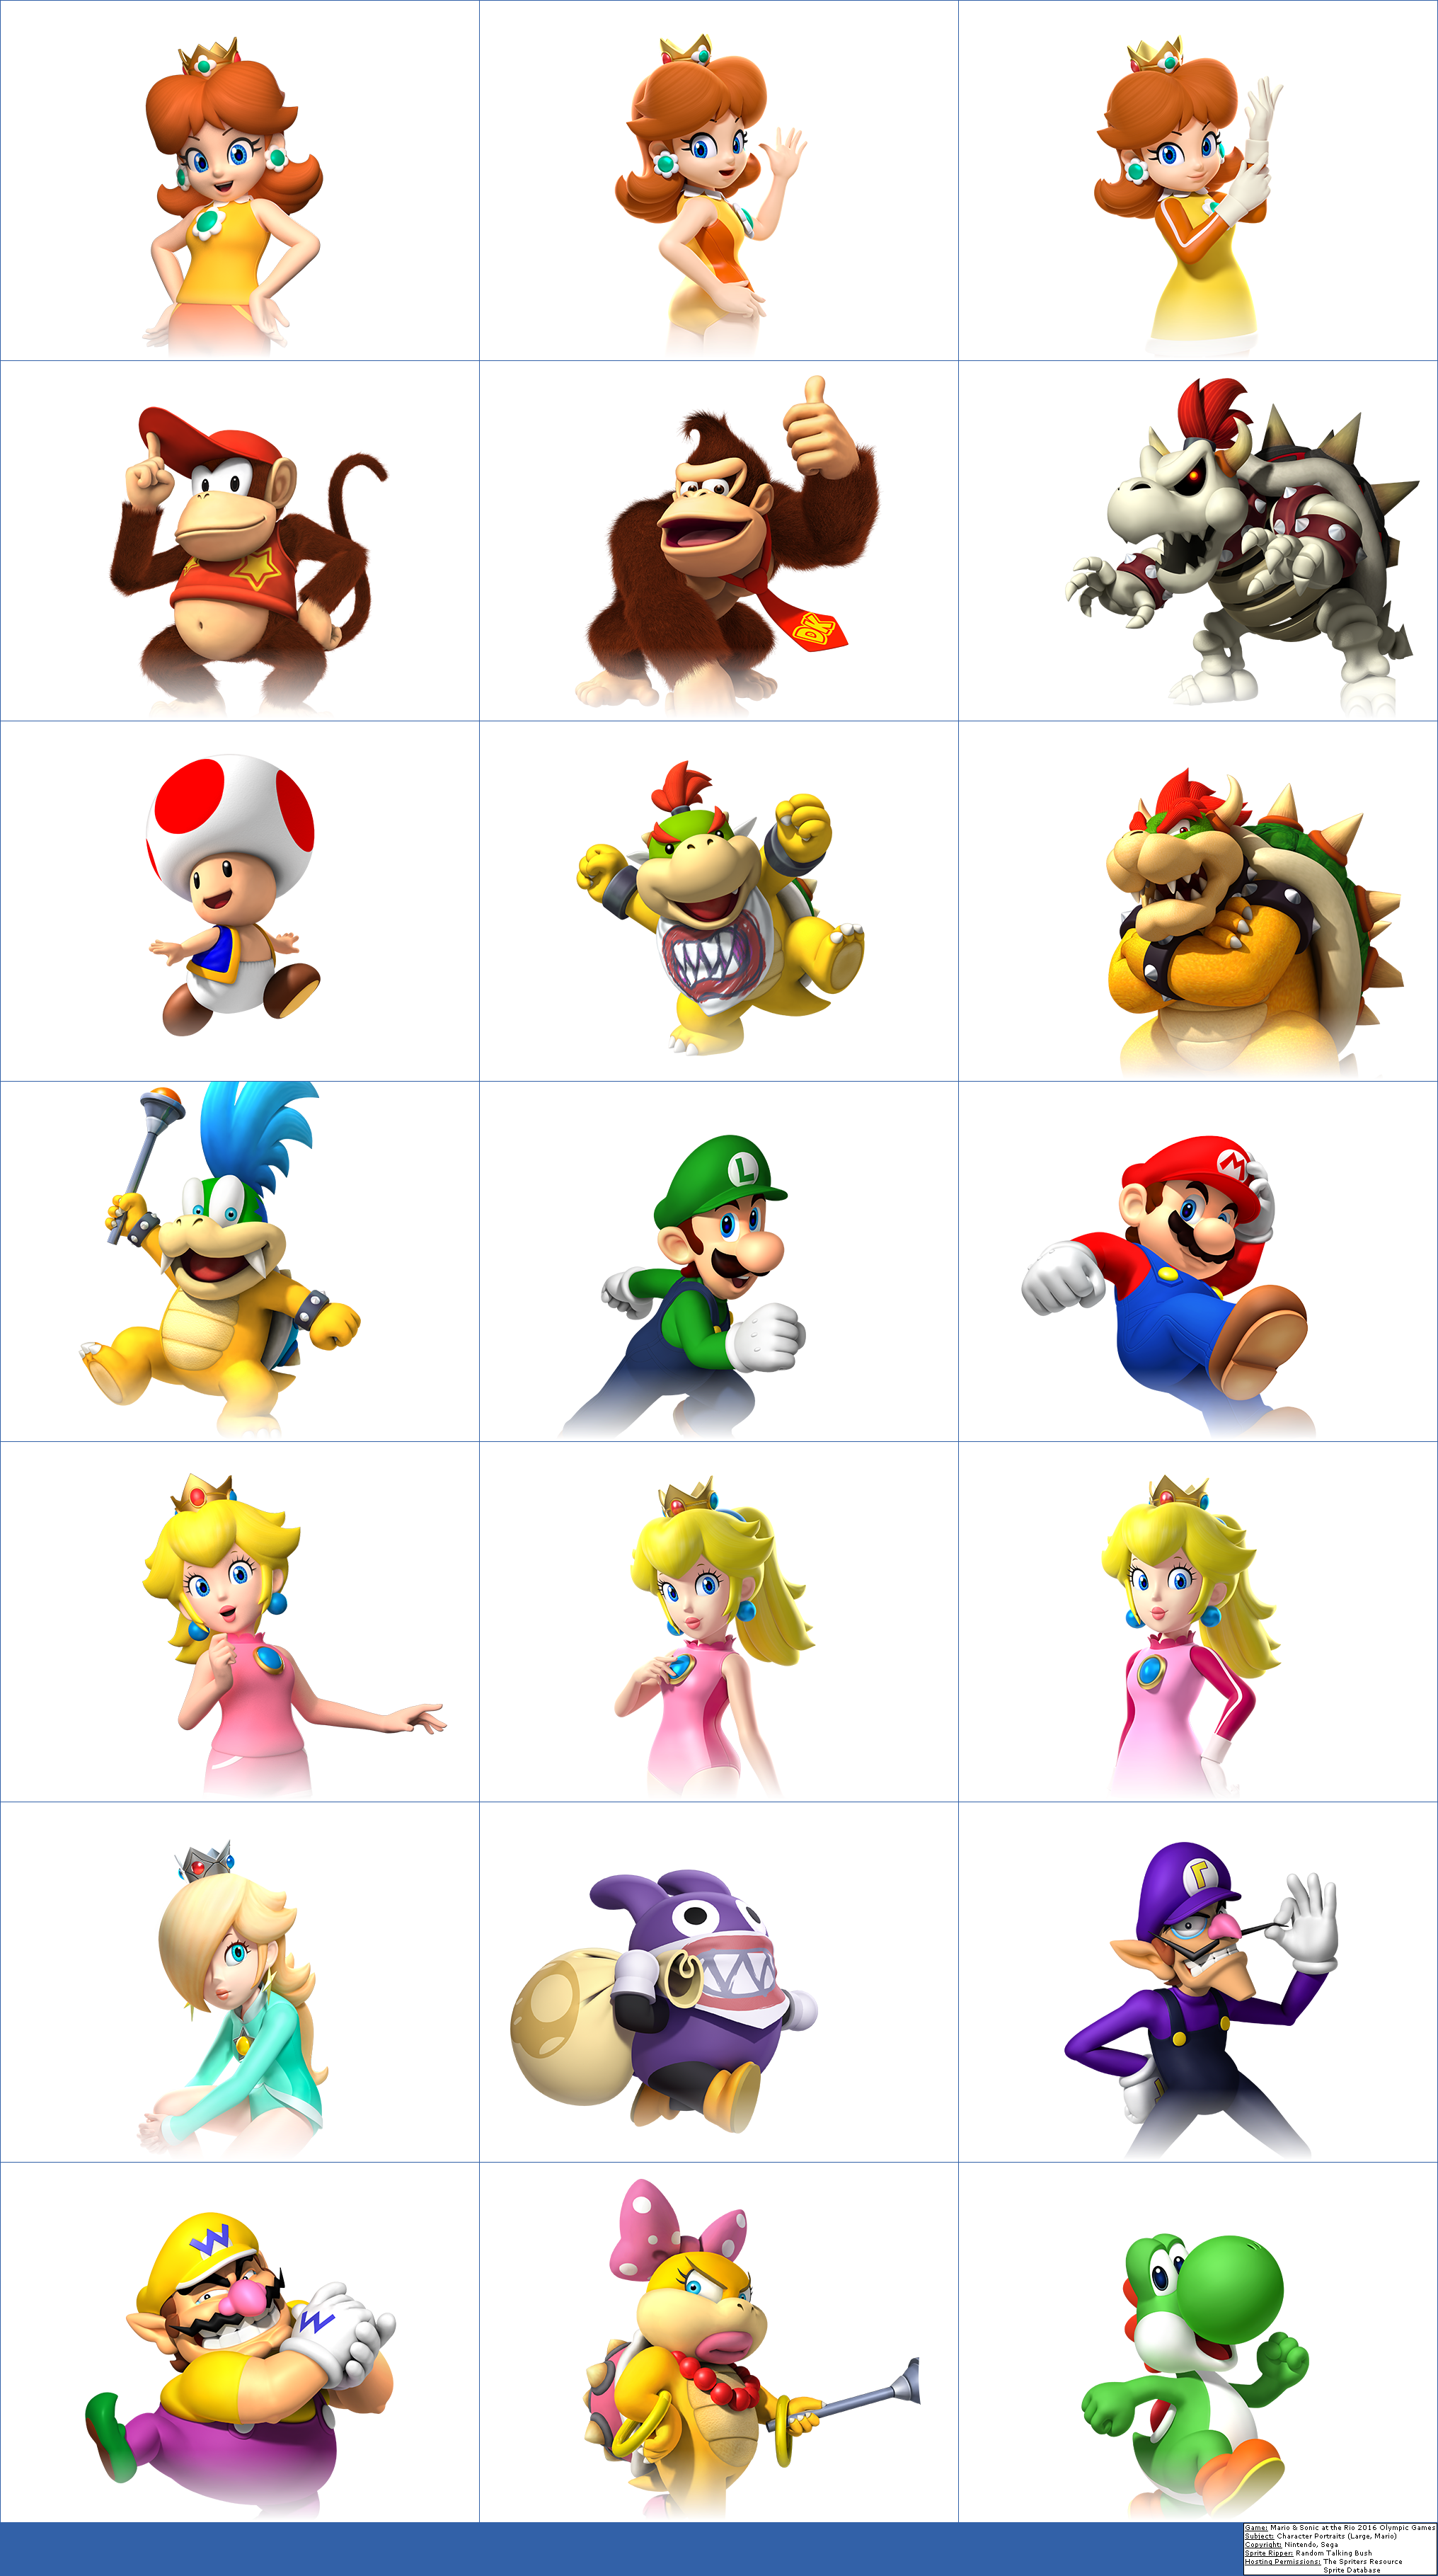 Mario & Sonic at the Rio 2016 Olympic Games - Character Portraits (Large, Mario)